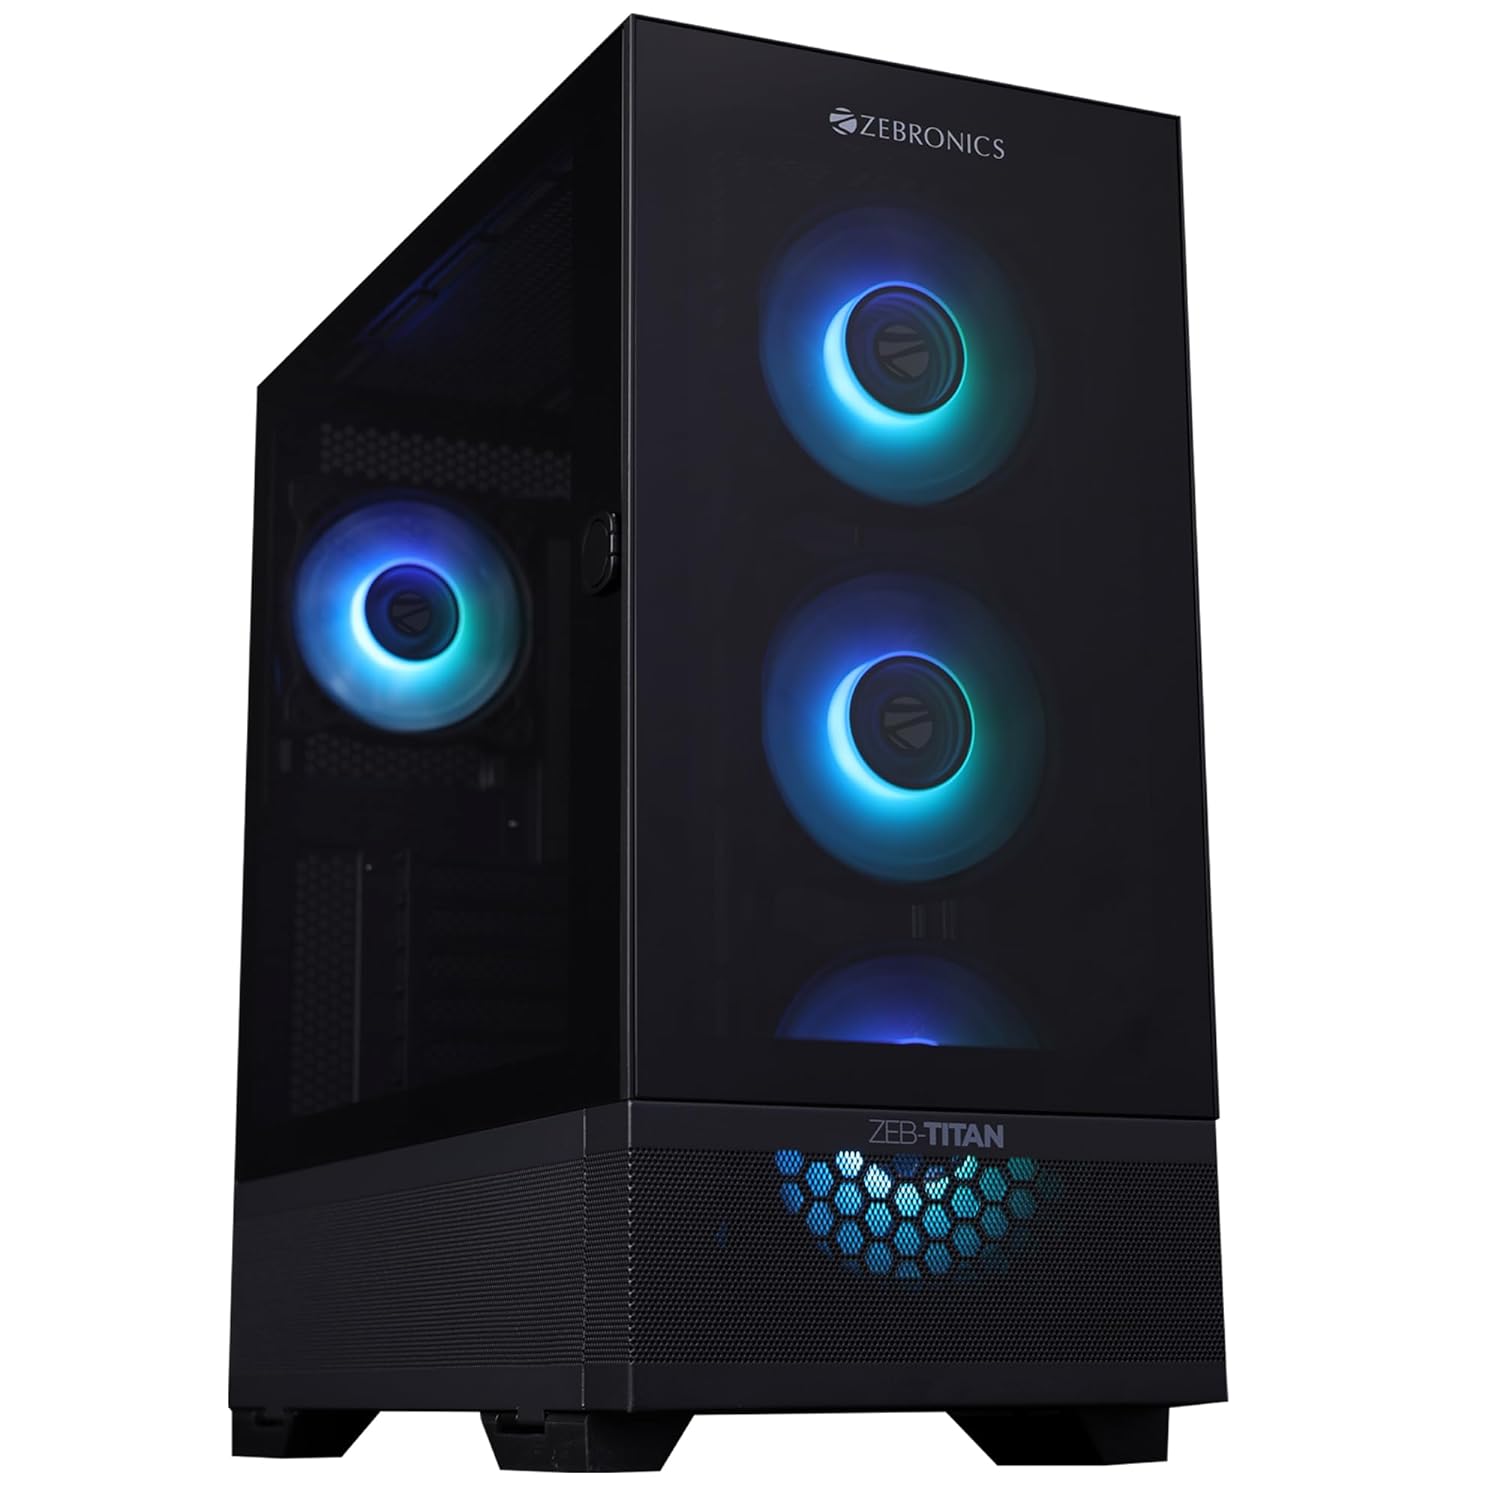 Zebronics Titan Full Tower Computer Case - EATX/ATX/mATX, HDD (3.5") 2 max, SSD (2.5") 4 max, 175mm CPU Cooler Size, 400mm VGA Size, RGB Fans, Tempered Glass Side Panels